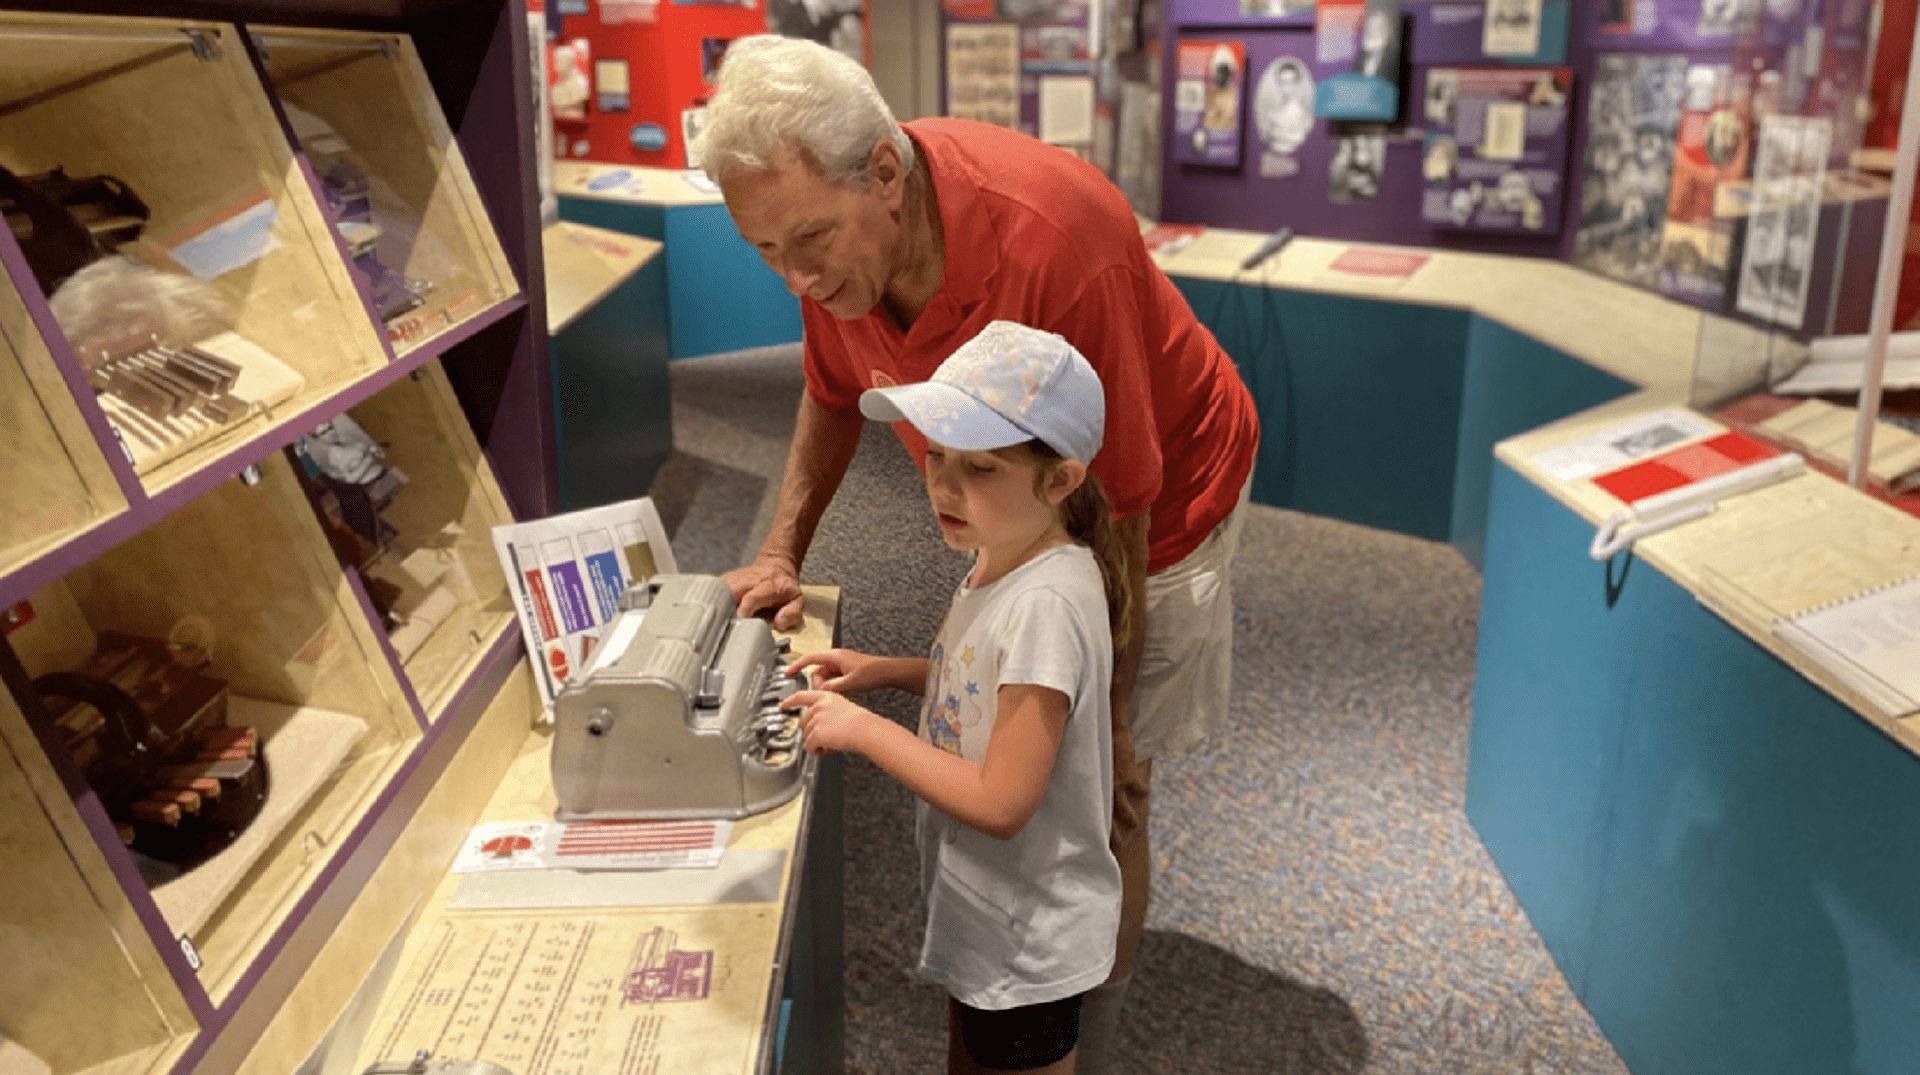 An older man watches intently as a young girl wearing a baseball hat demonstrates how to use the braillewriter.